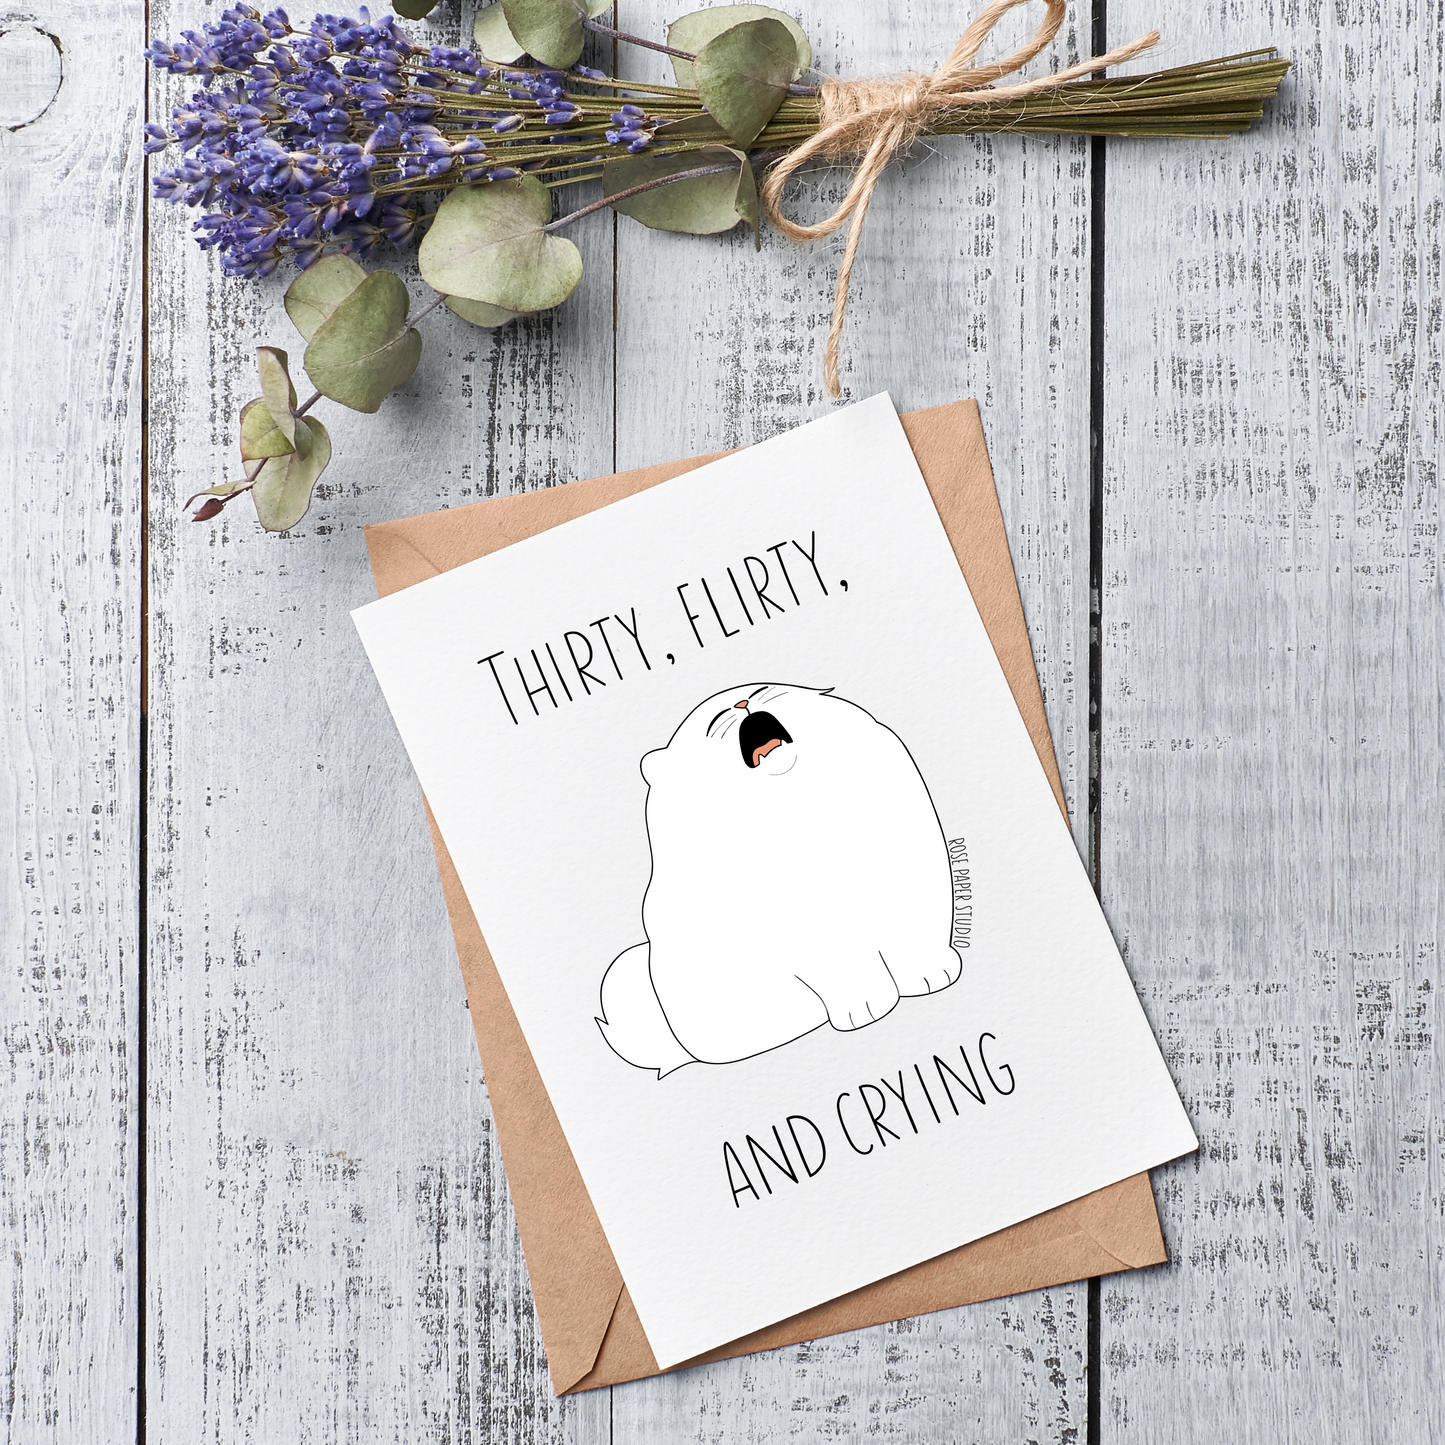 Thirty, Flirty, and Crying Card | Magda the Crying Cat Drawing | 30th Birthday Card | Funny Friend Birthday Card | Hand Drawn Modern Calligraphy Card